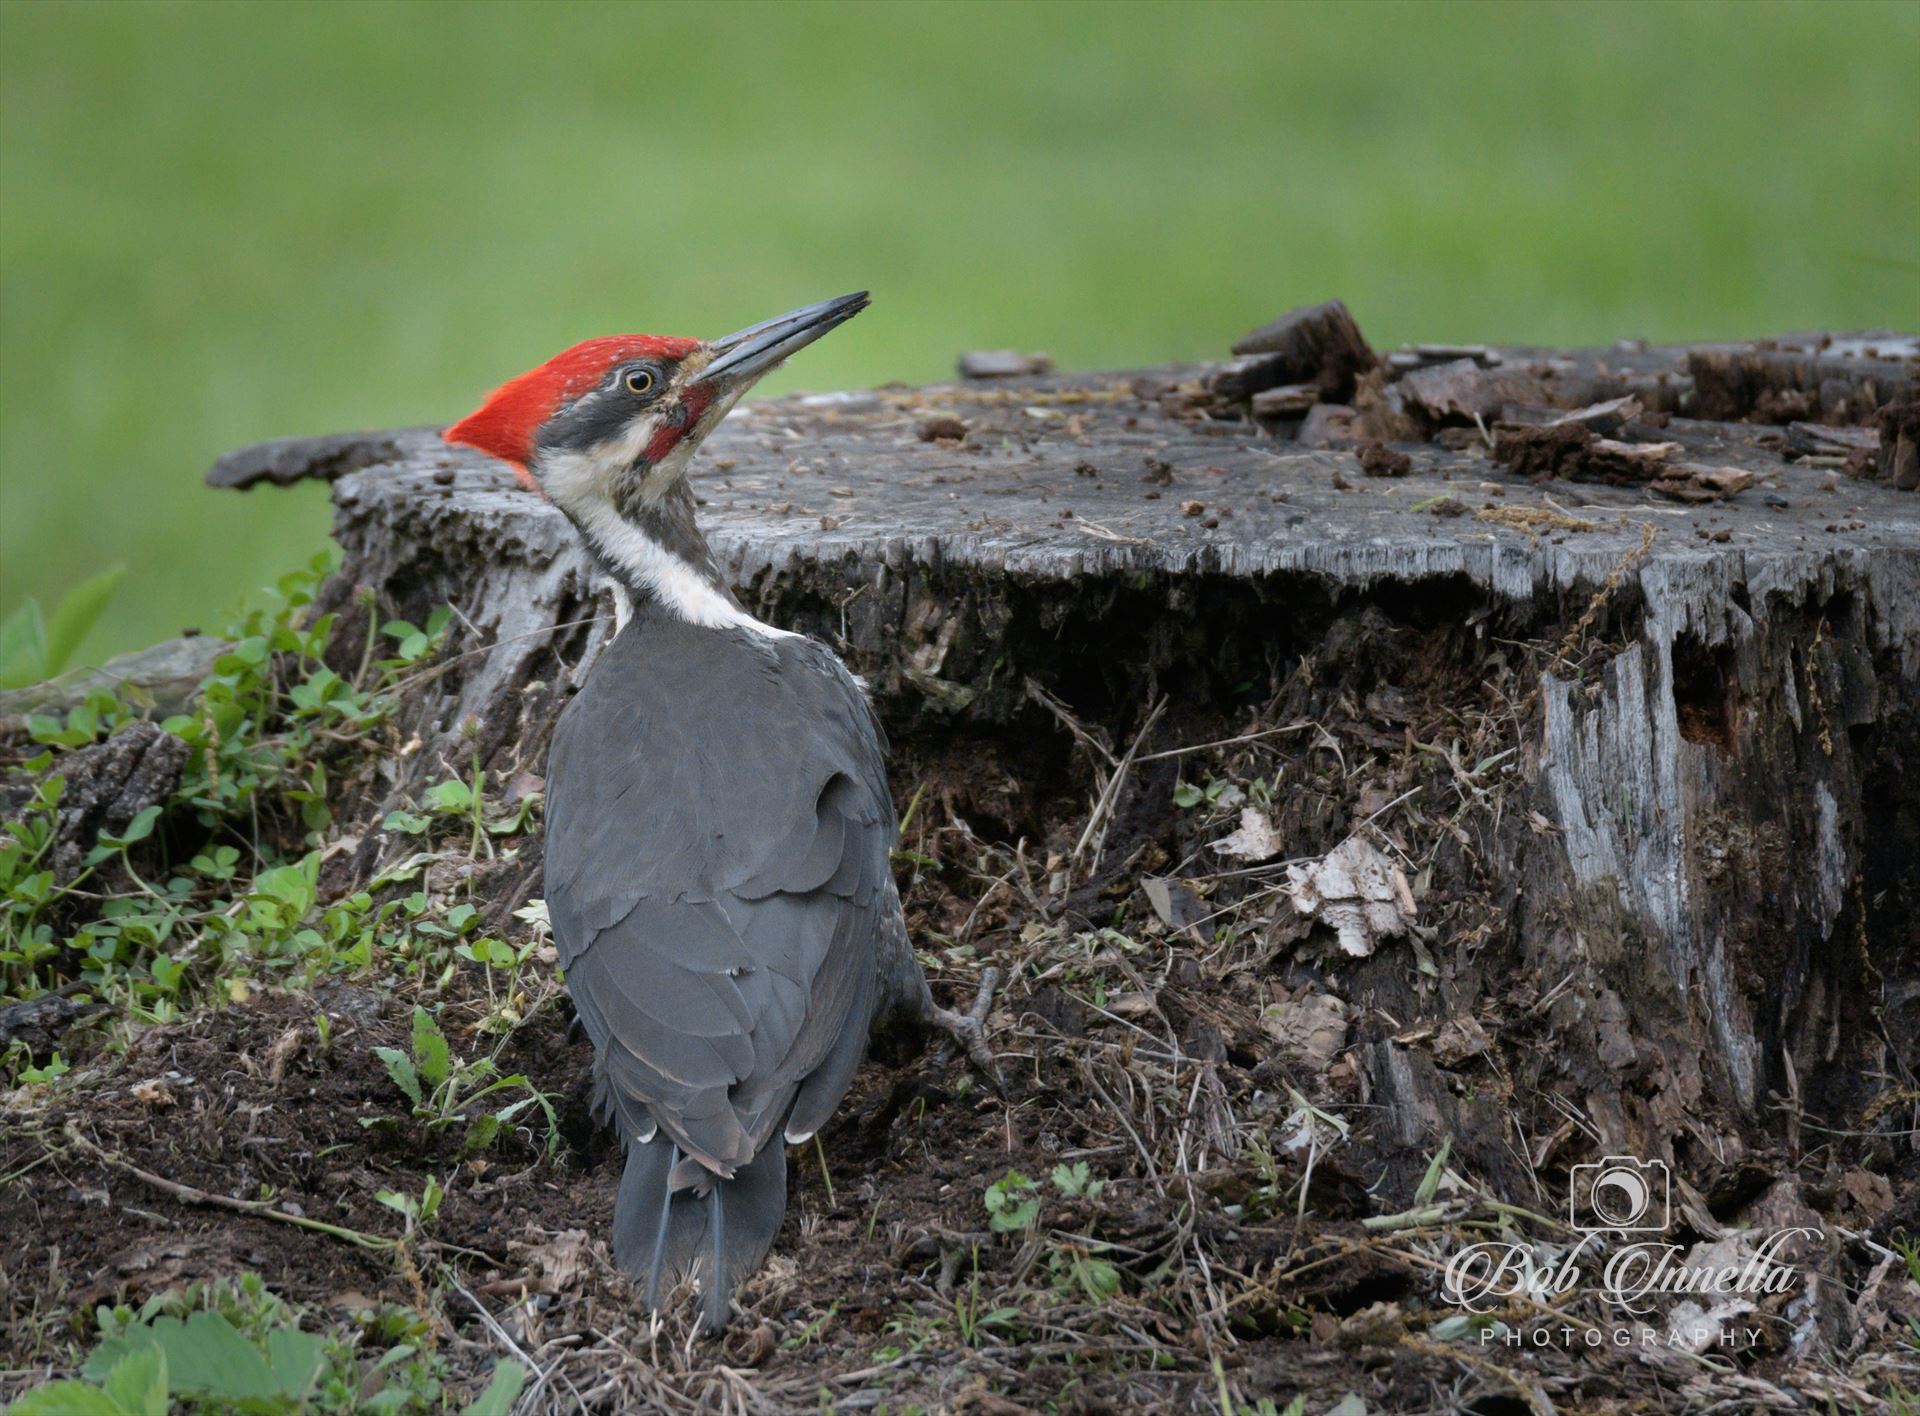 Pileated Woodpecker "Woody" In The Wilds Of Pennsylvania
In A Logged Area Cut Many Years ago by Buckmaster